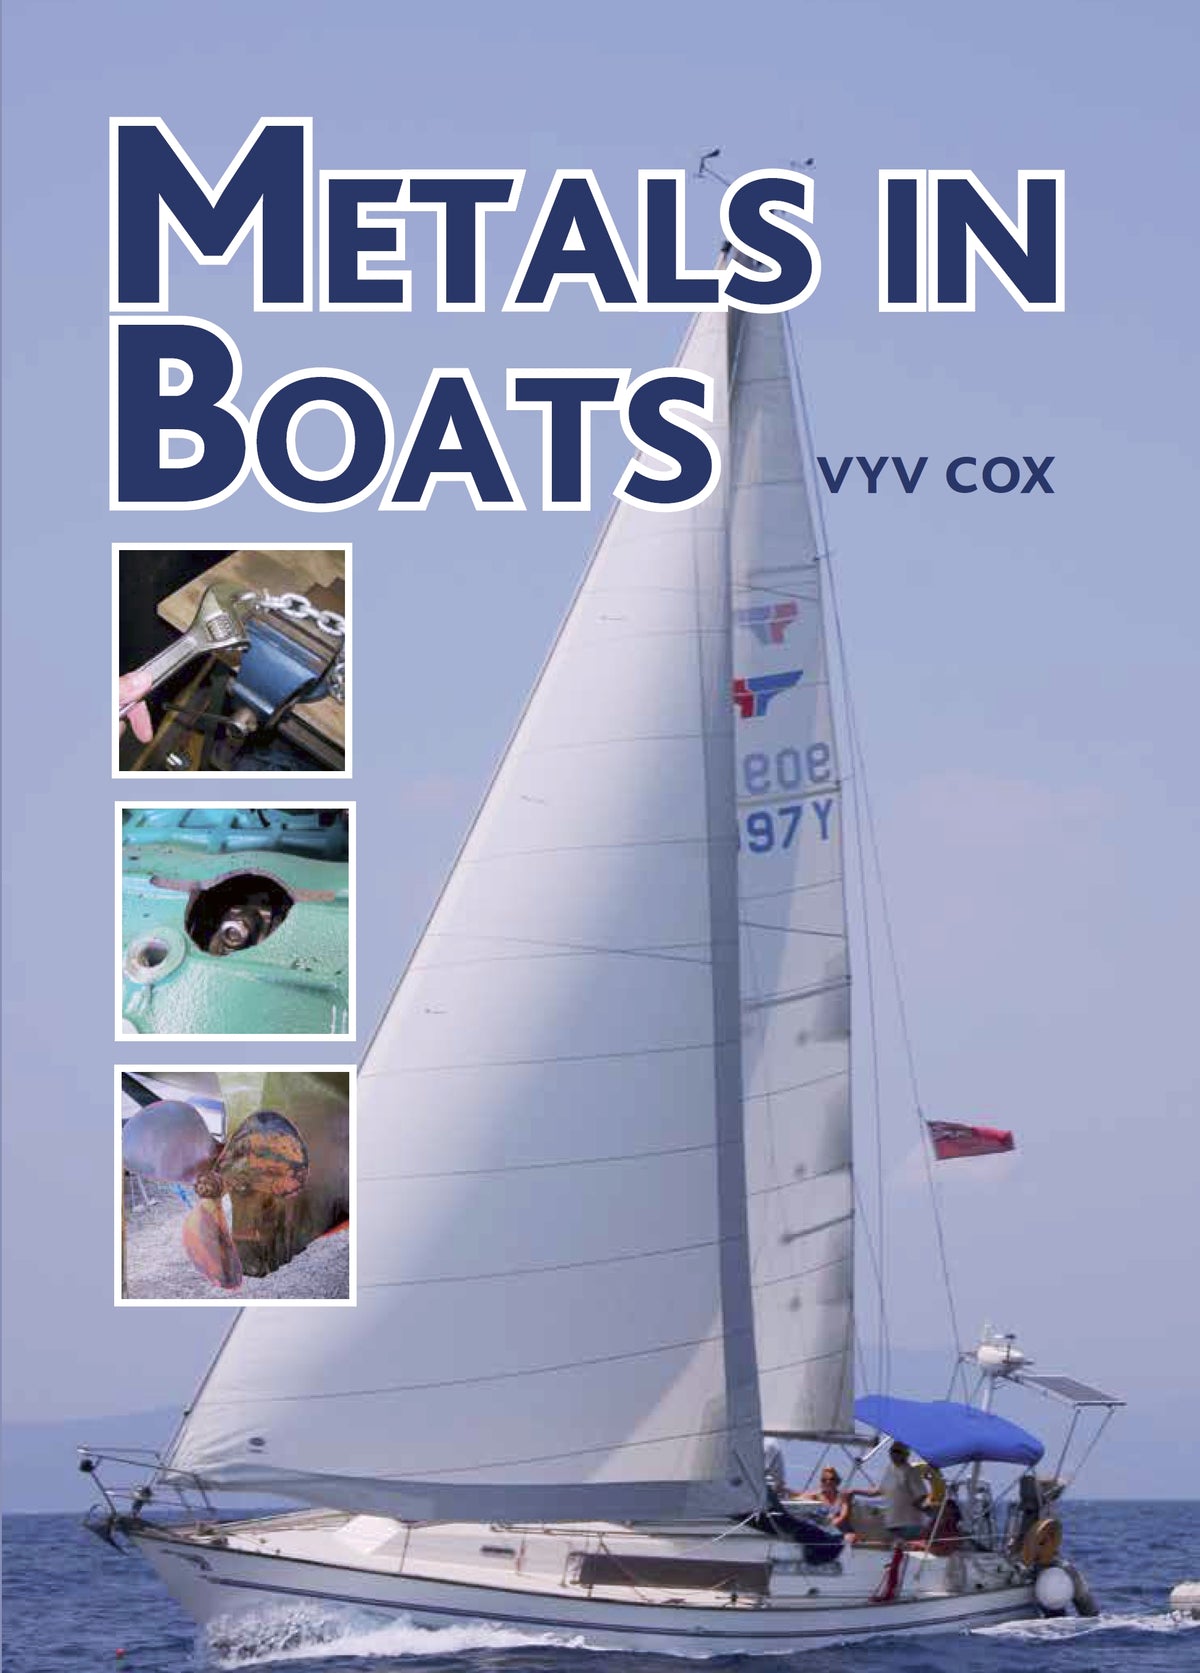 Metals in Boats